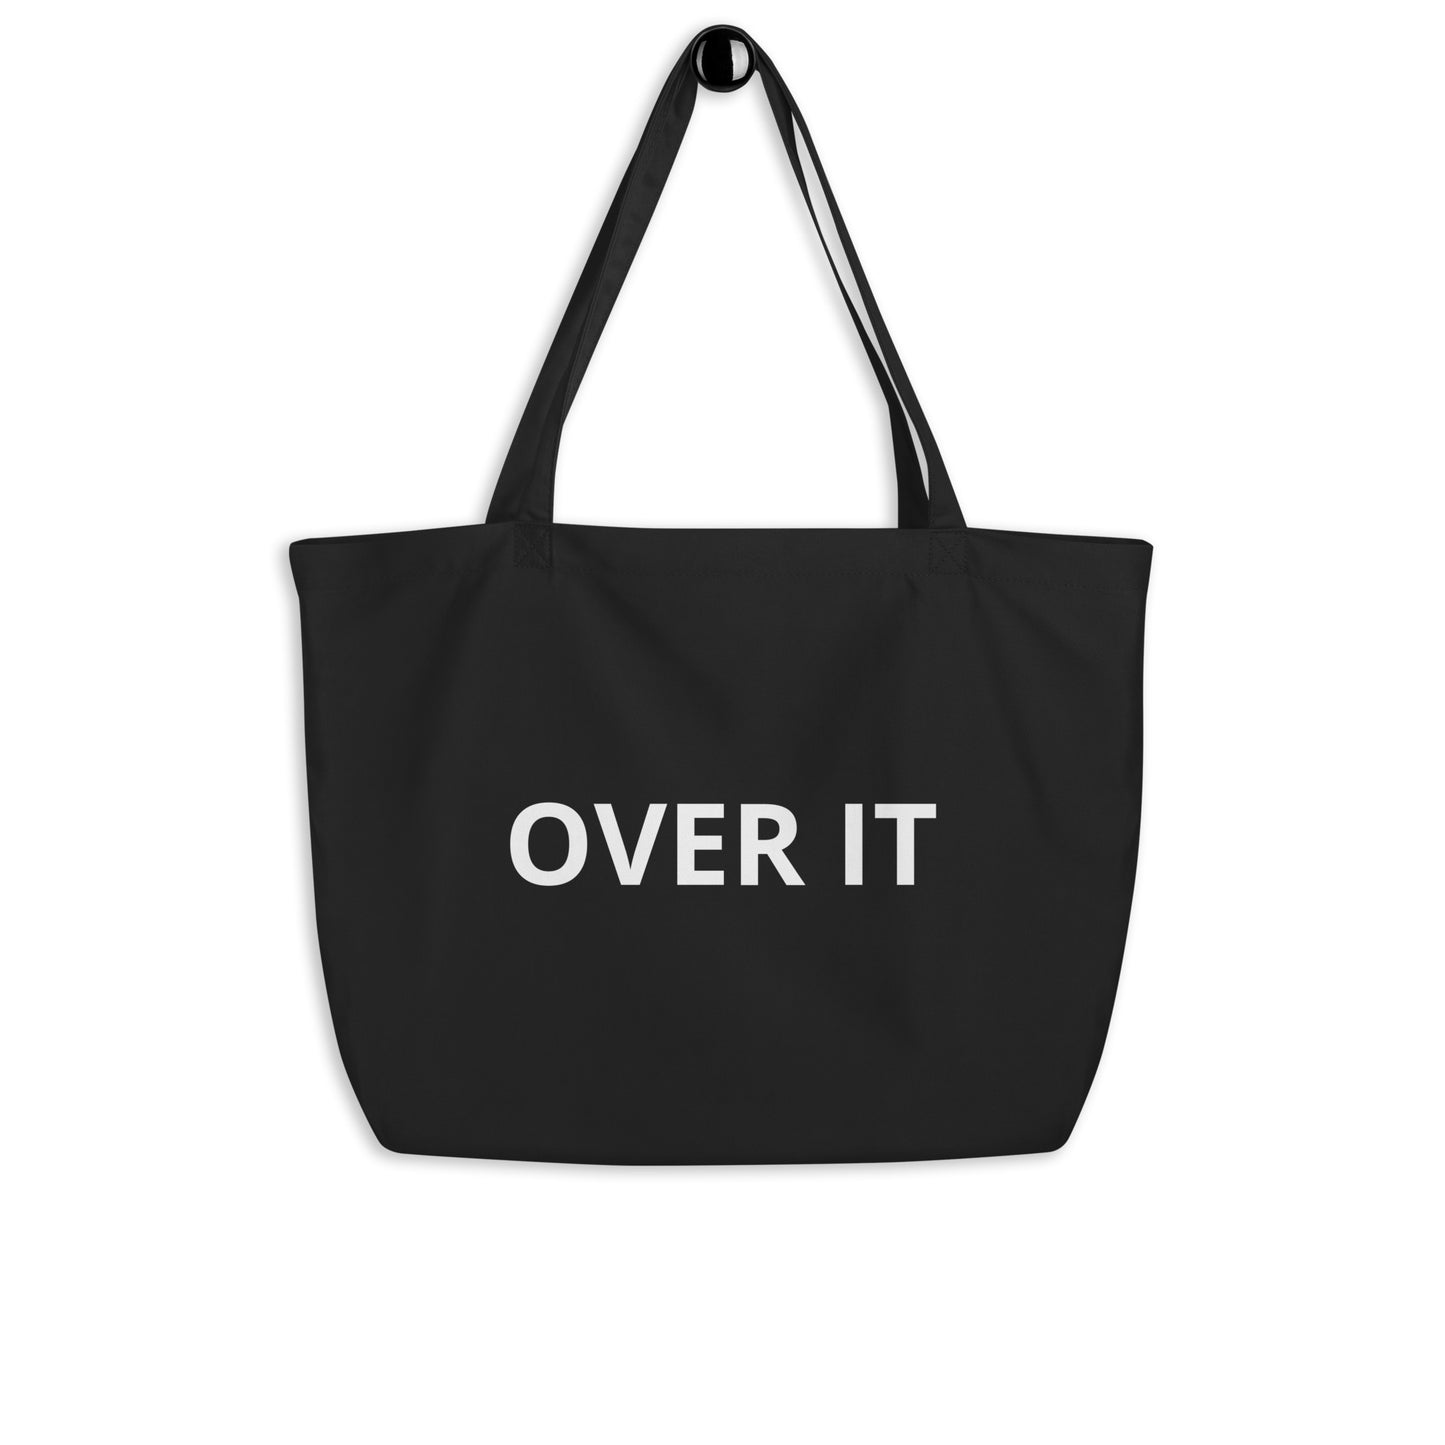 OVER IT Large organic tote bag